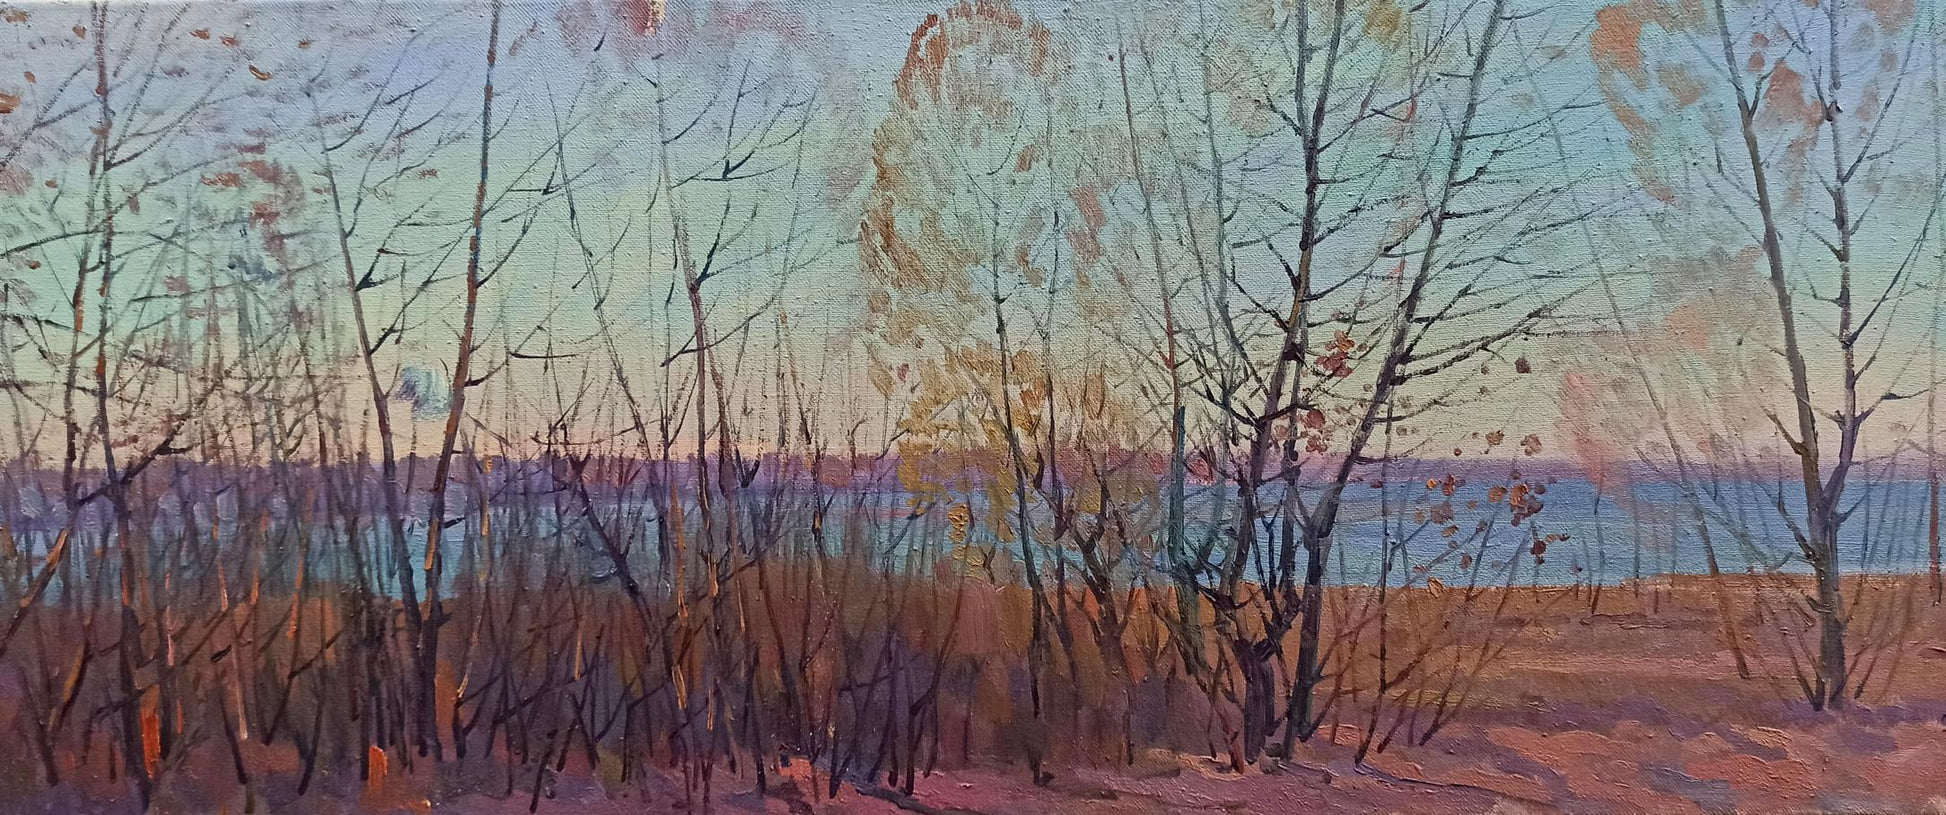 Oil painting Autumn thoughts about beauty Peter Dobrev